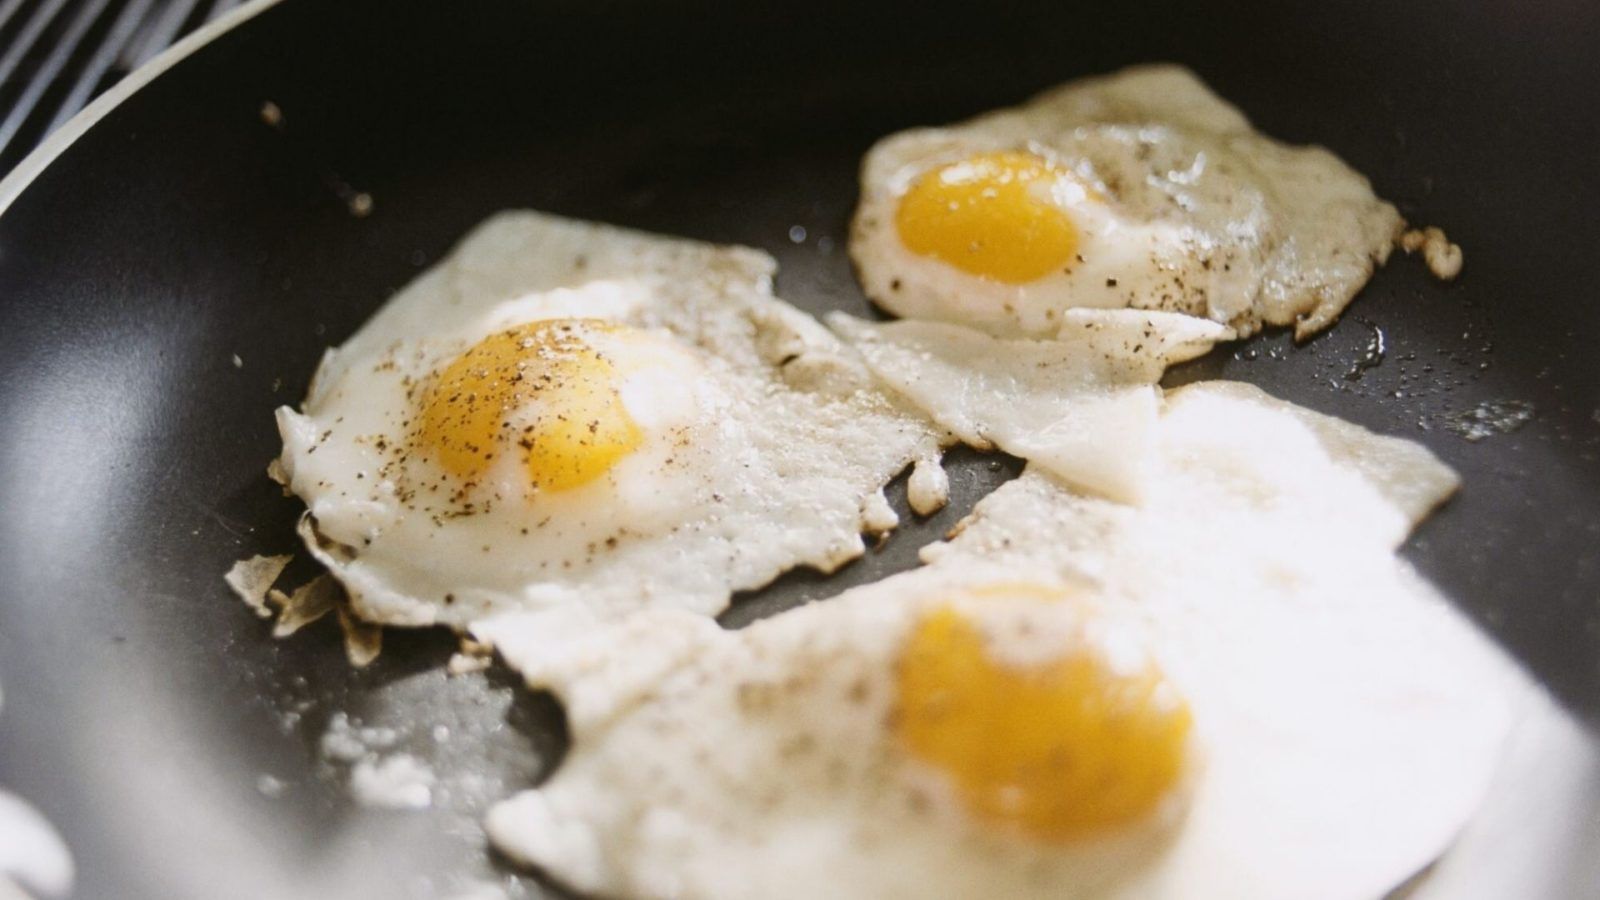 Eating one egg each day could decrease your risk of heart disease, new study suggests